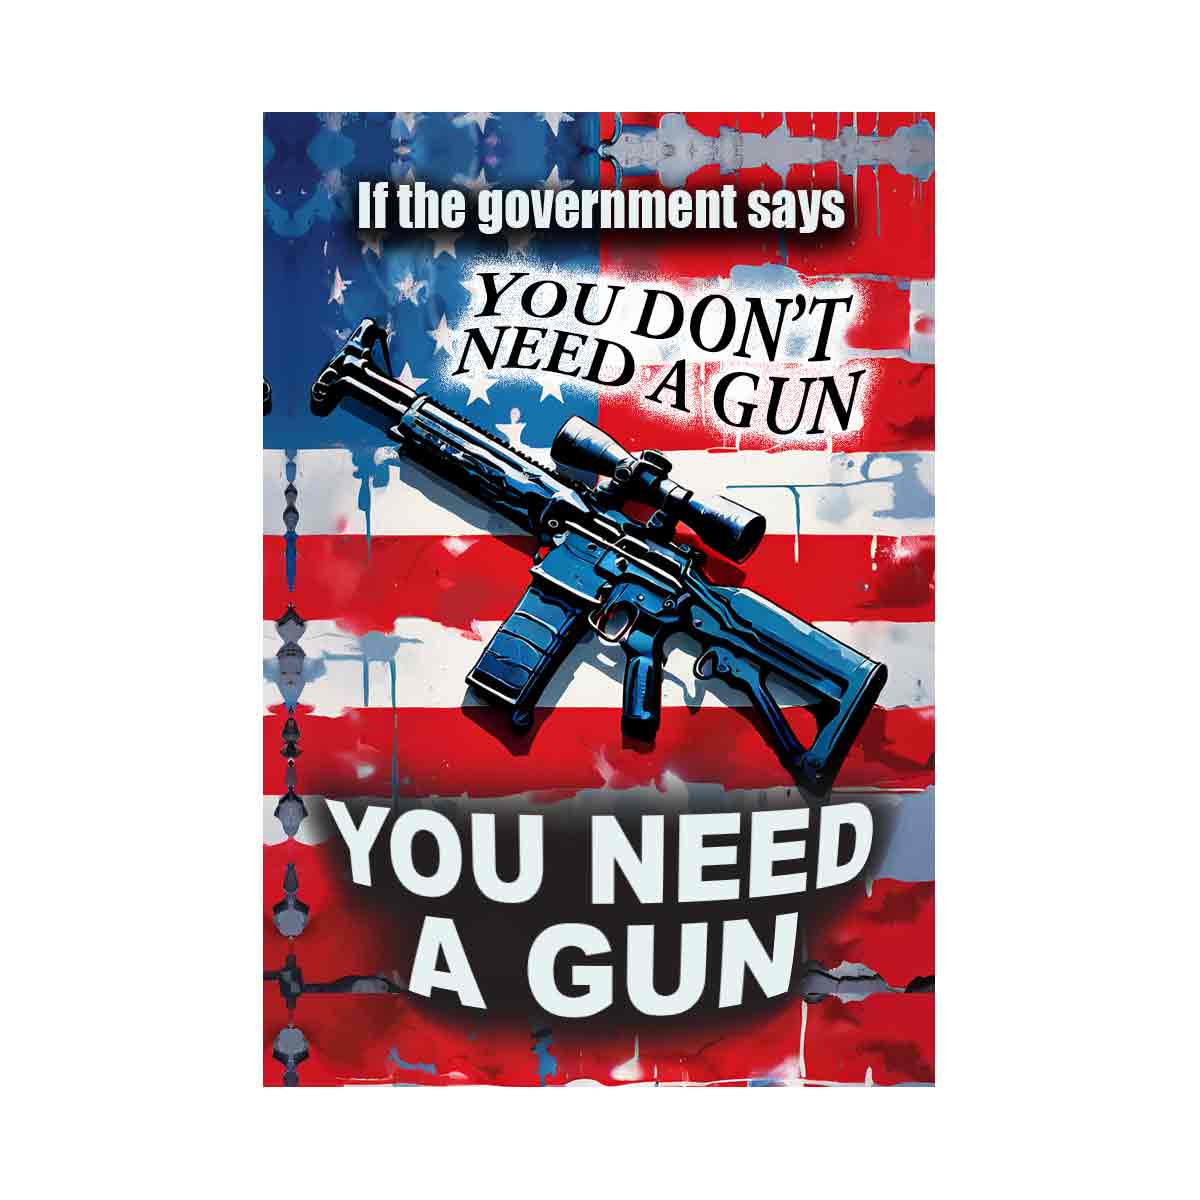 If the government says You don't need a gun